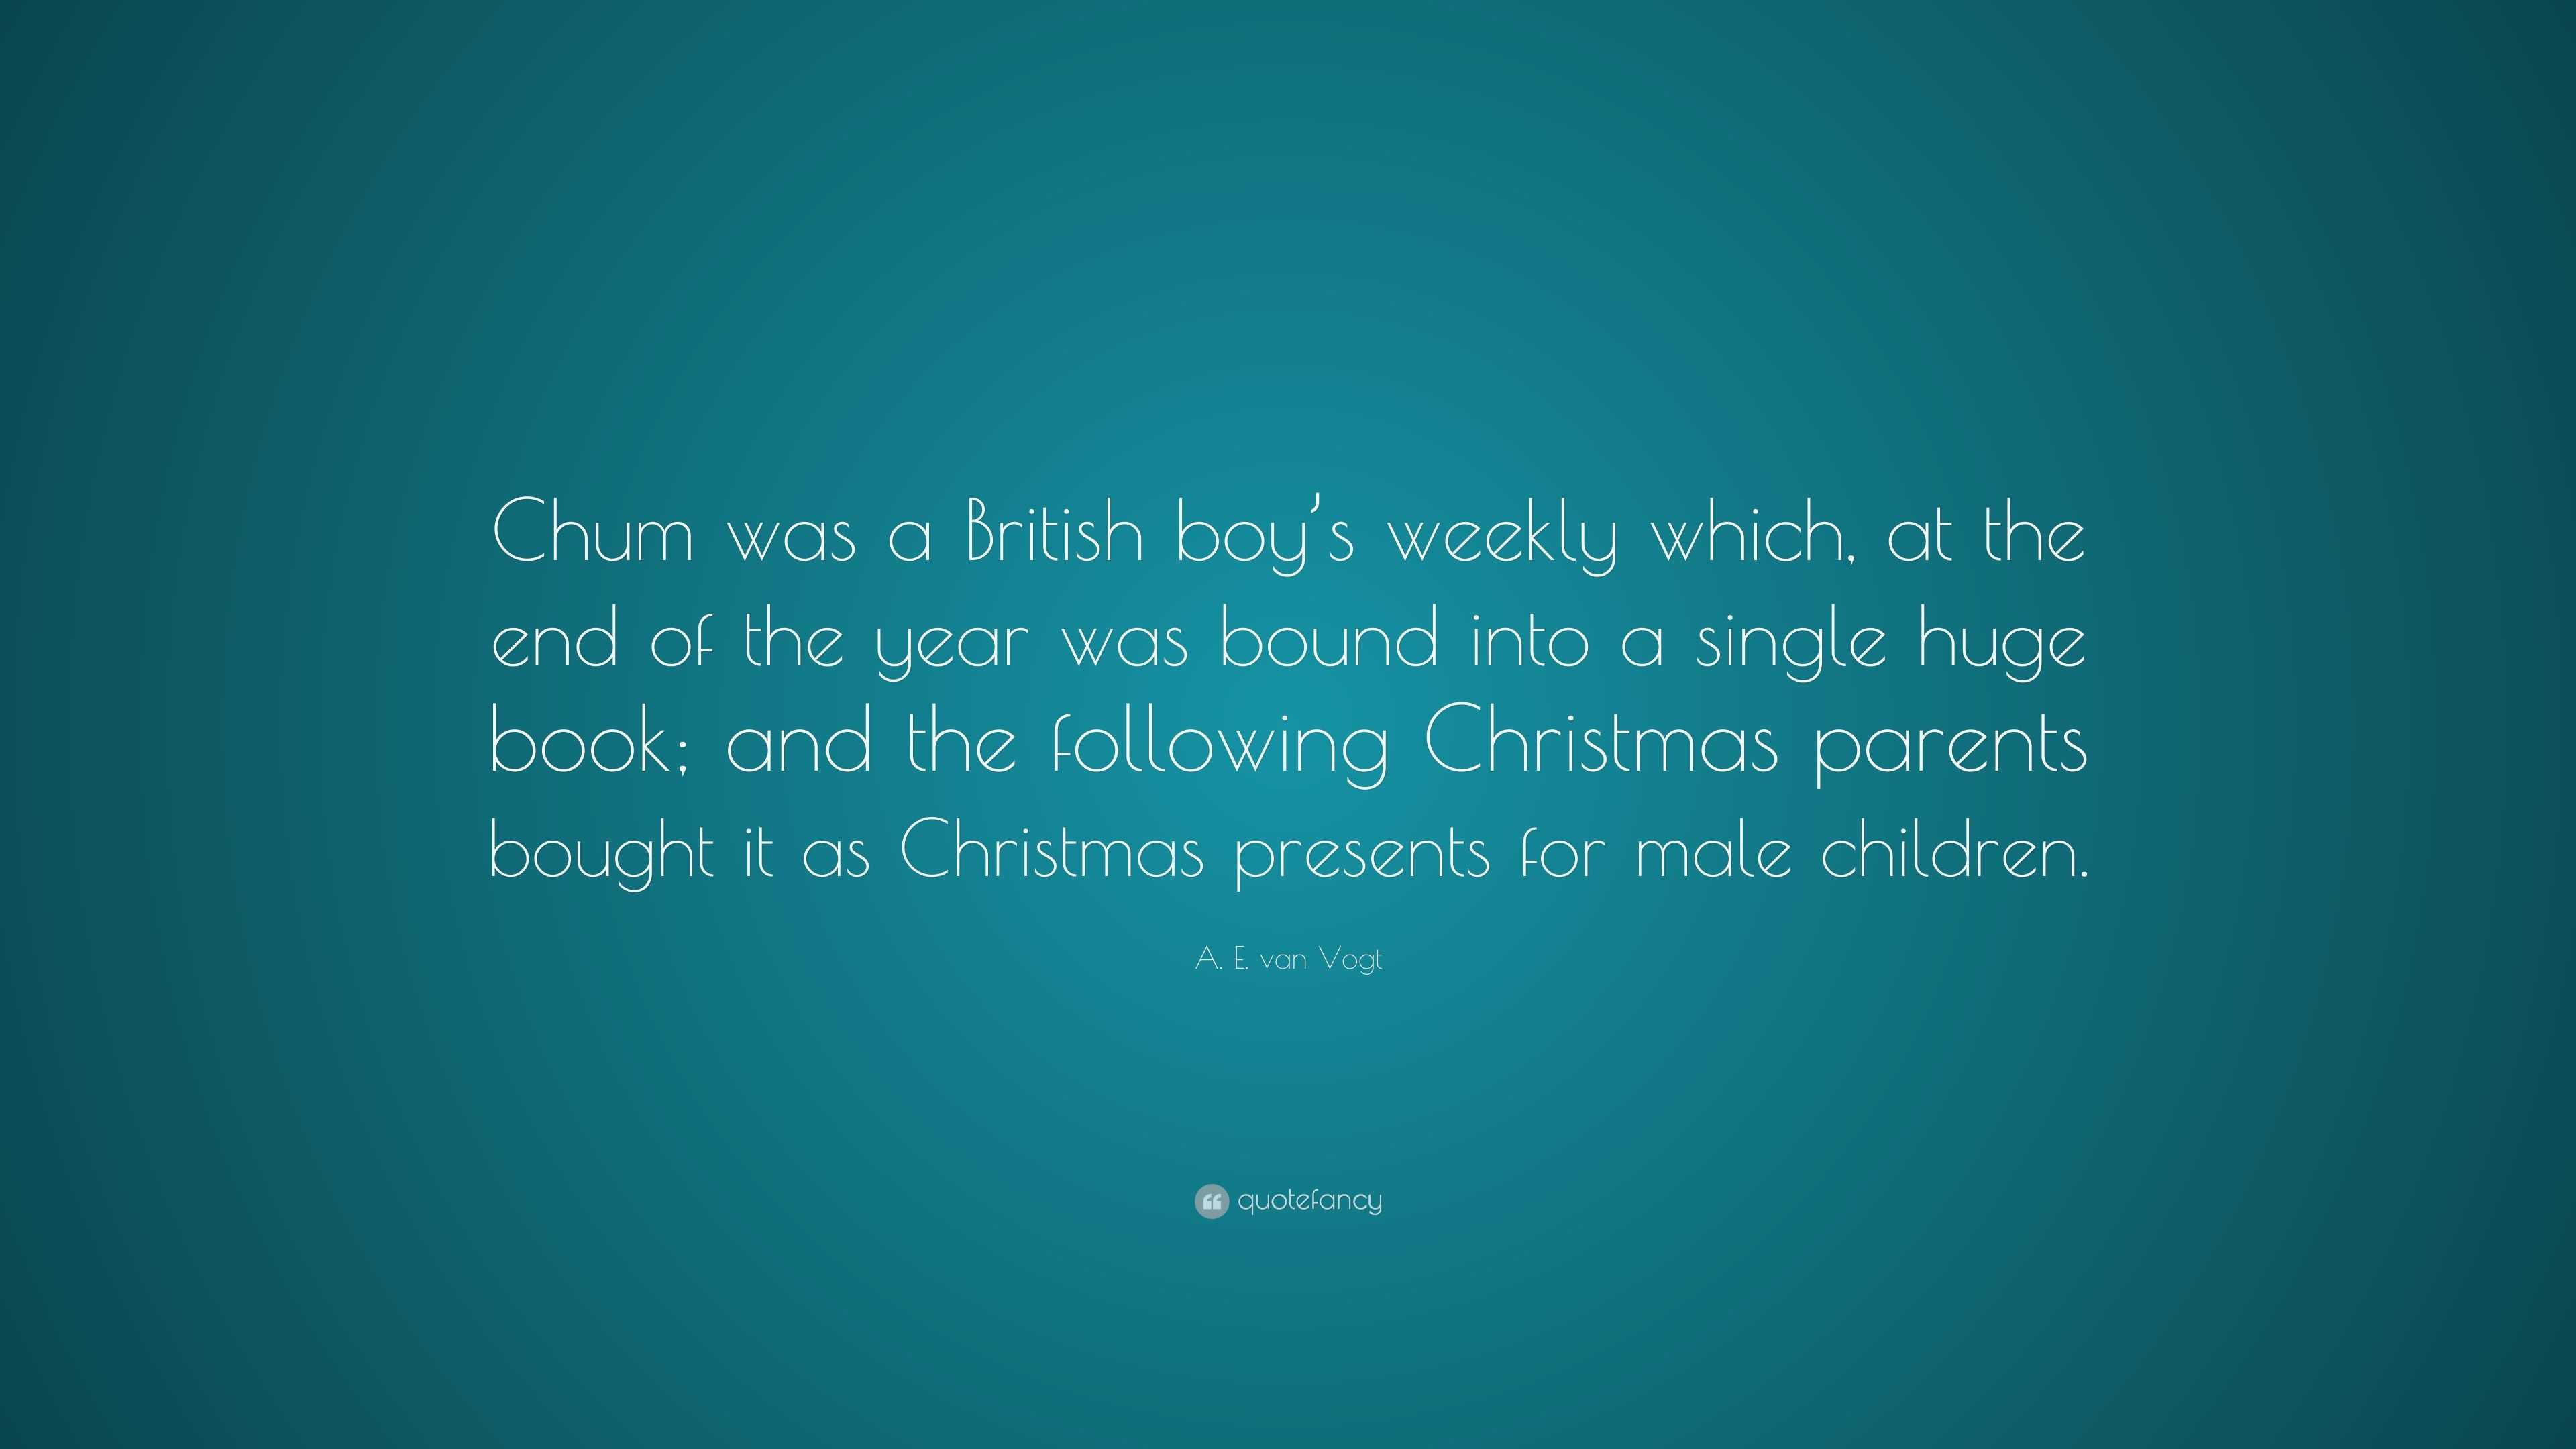 When should I buy Christmas presents? - Chums